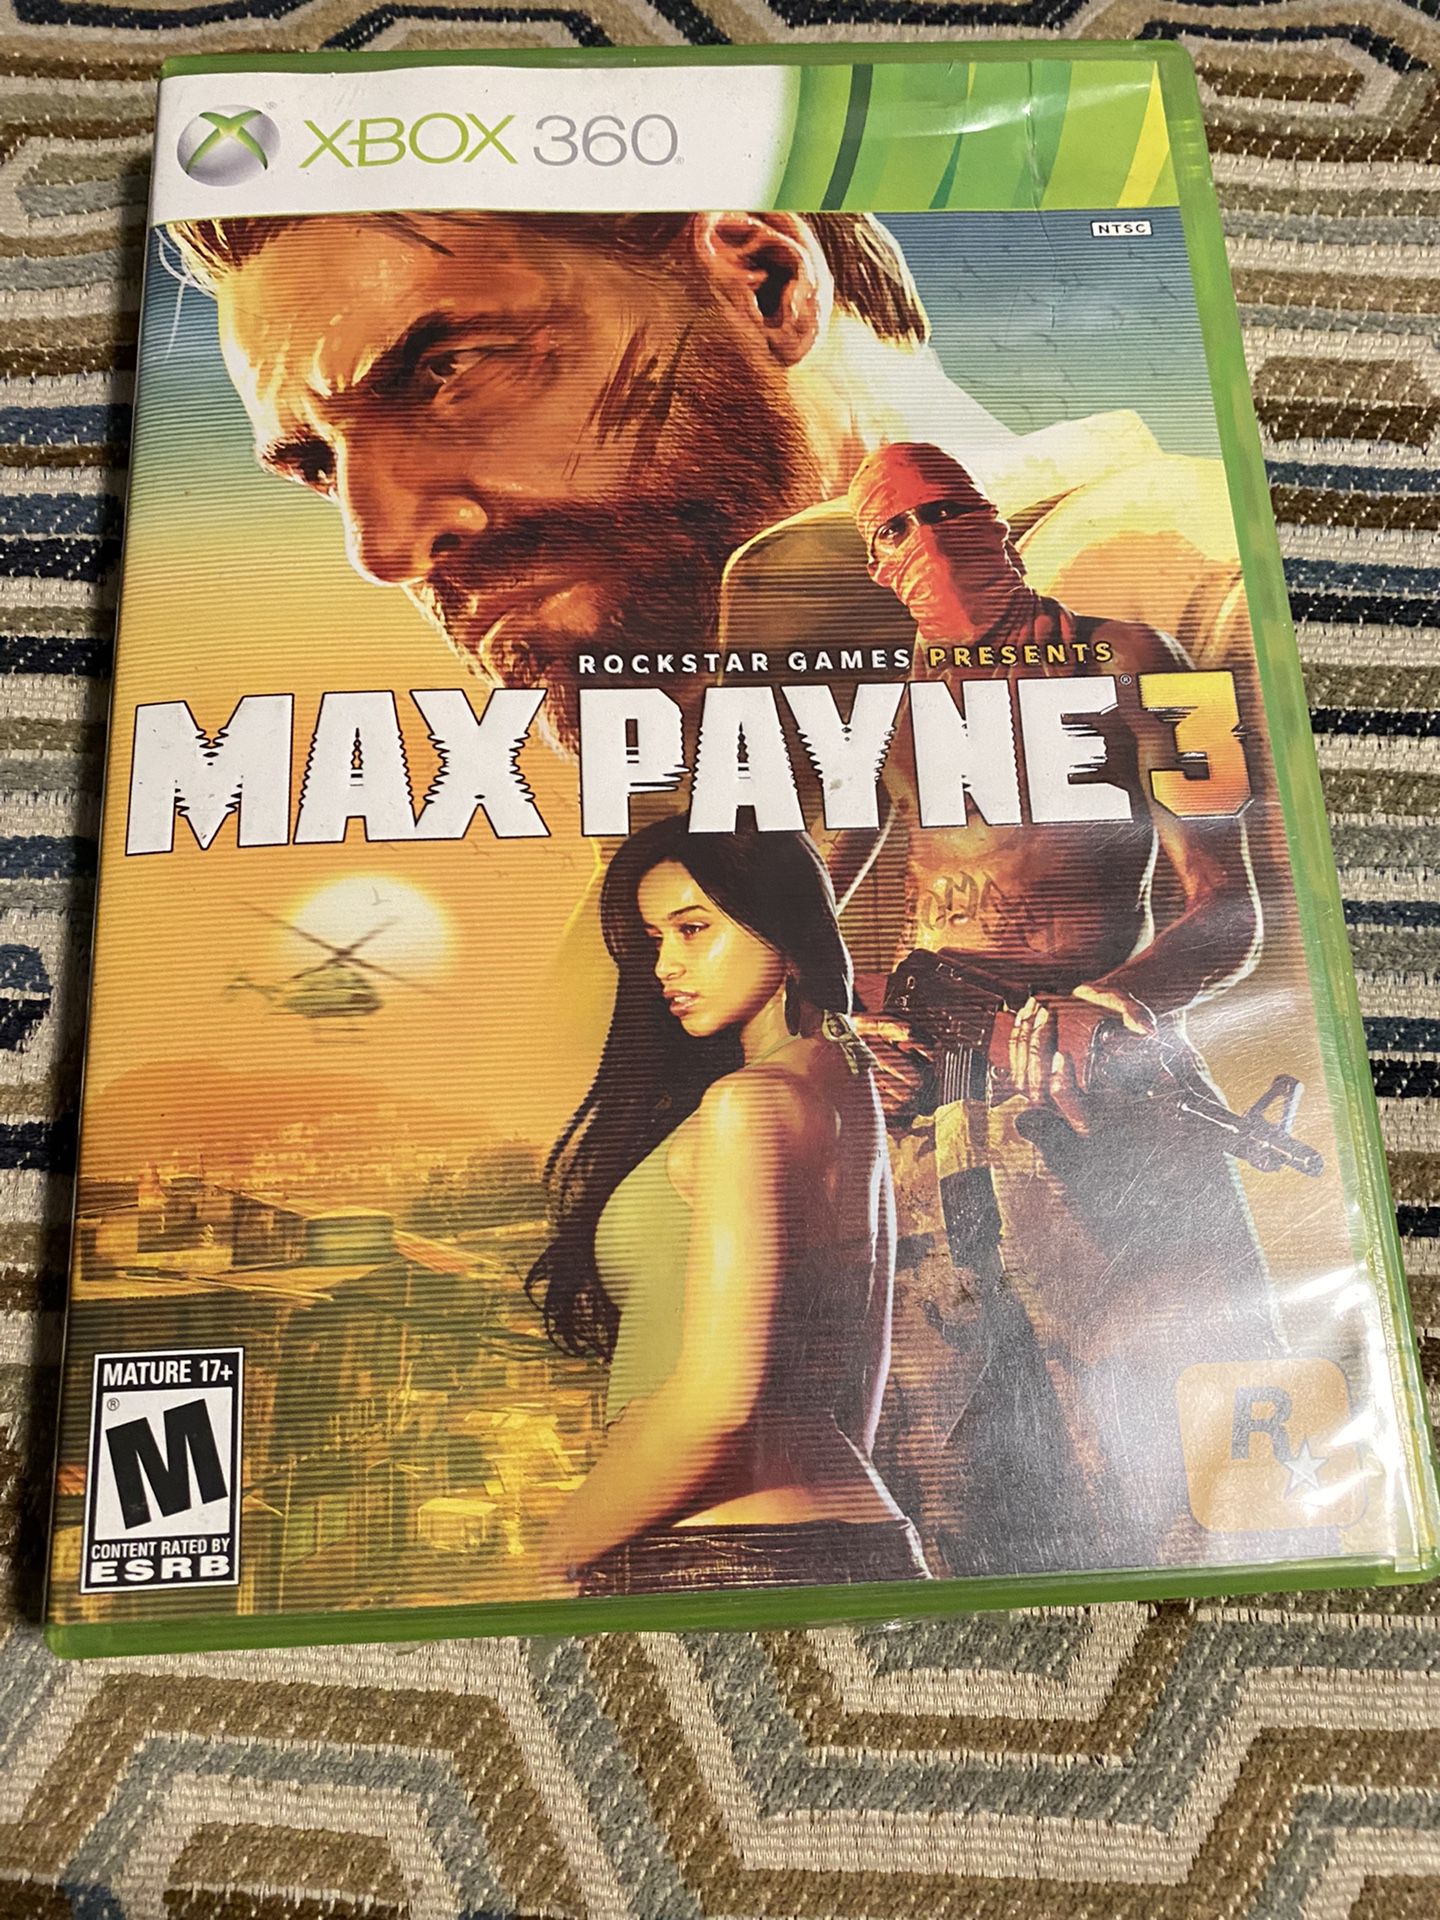 Max Payne3 For PS3 